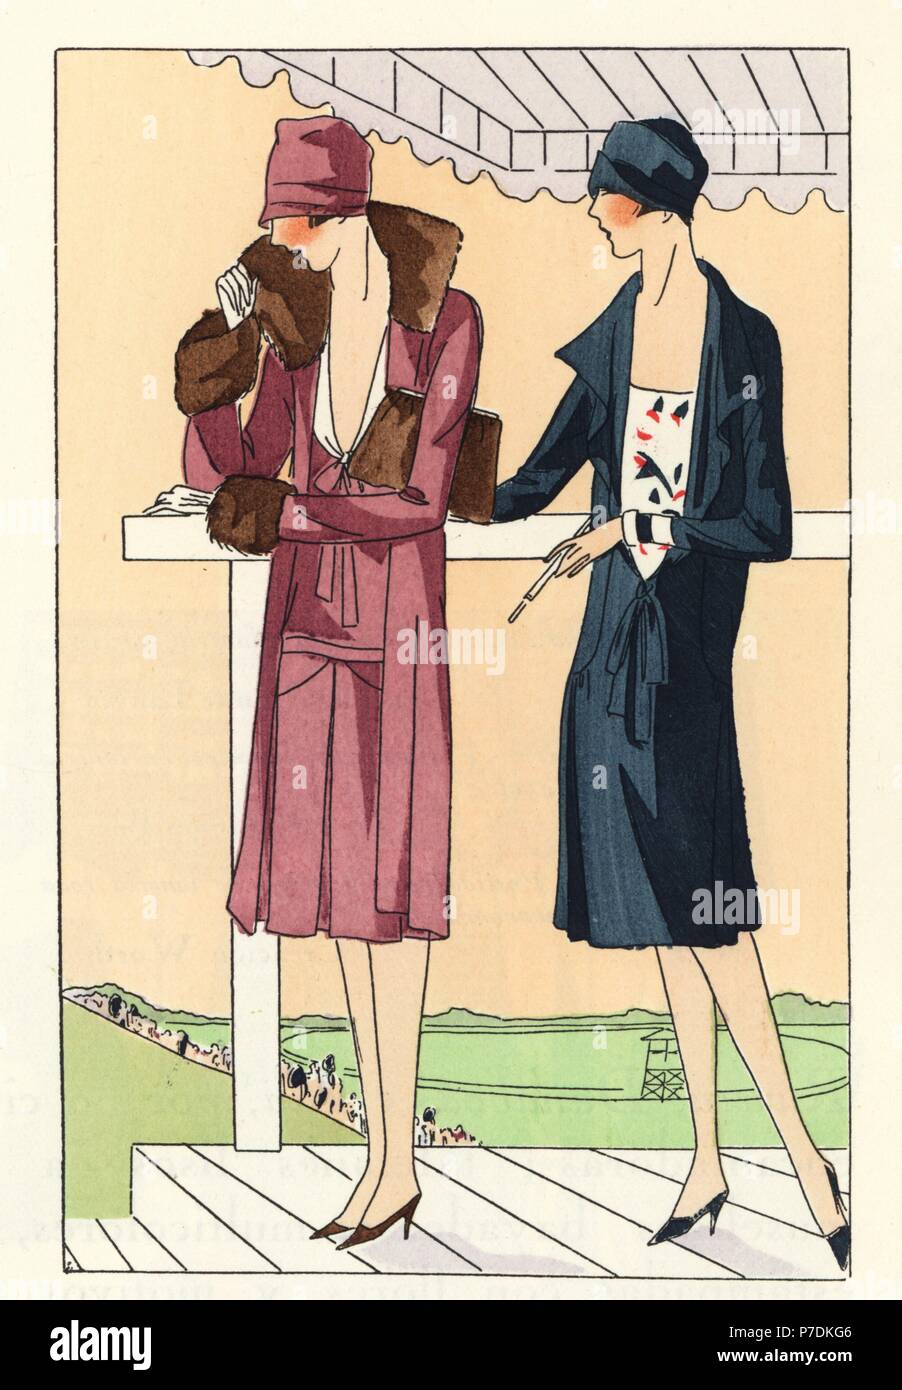 Women at the horse races: one in wool dress of antique pink with fur trim, and the other in a dark green dress with cigarette holder. Lithograph with pochoir (stencil) coloring from the luxury fashion magazine Art Gout Beaute, ABG, Paris, April 1926. Stock Photo